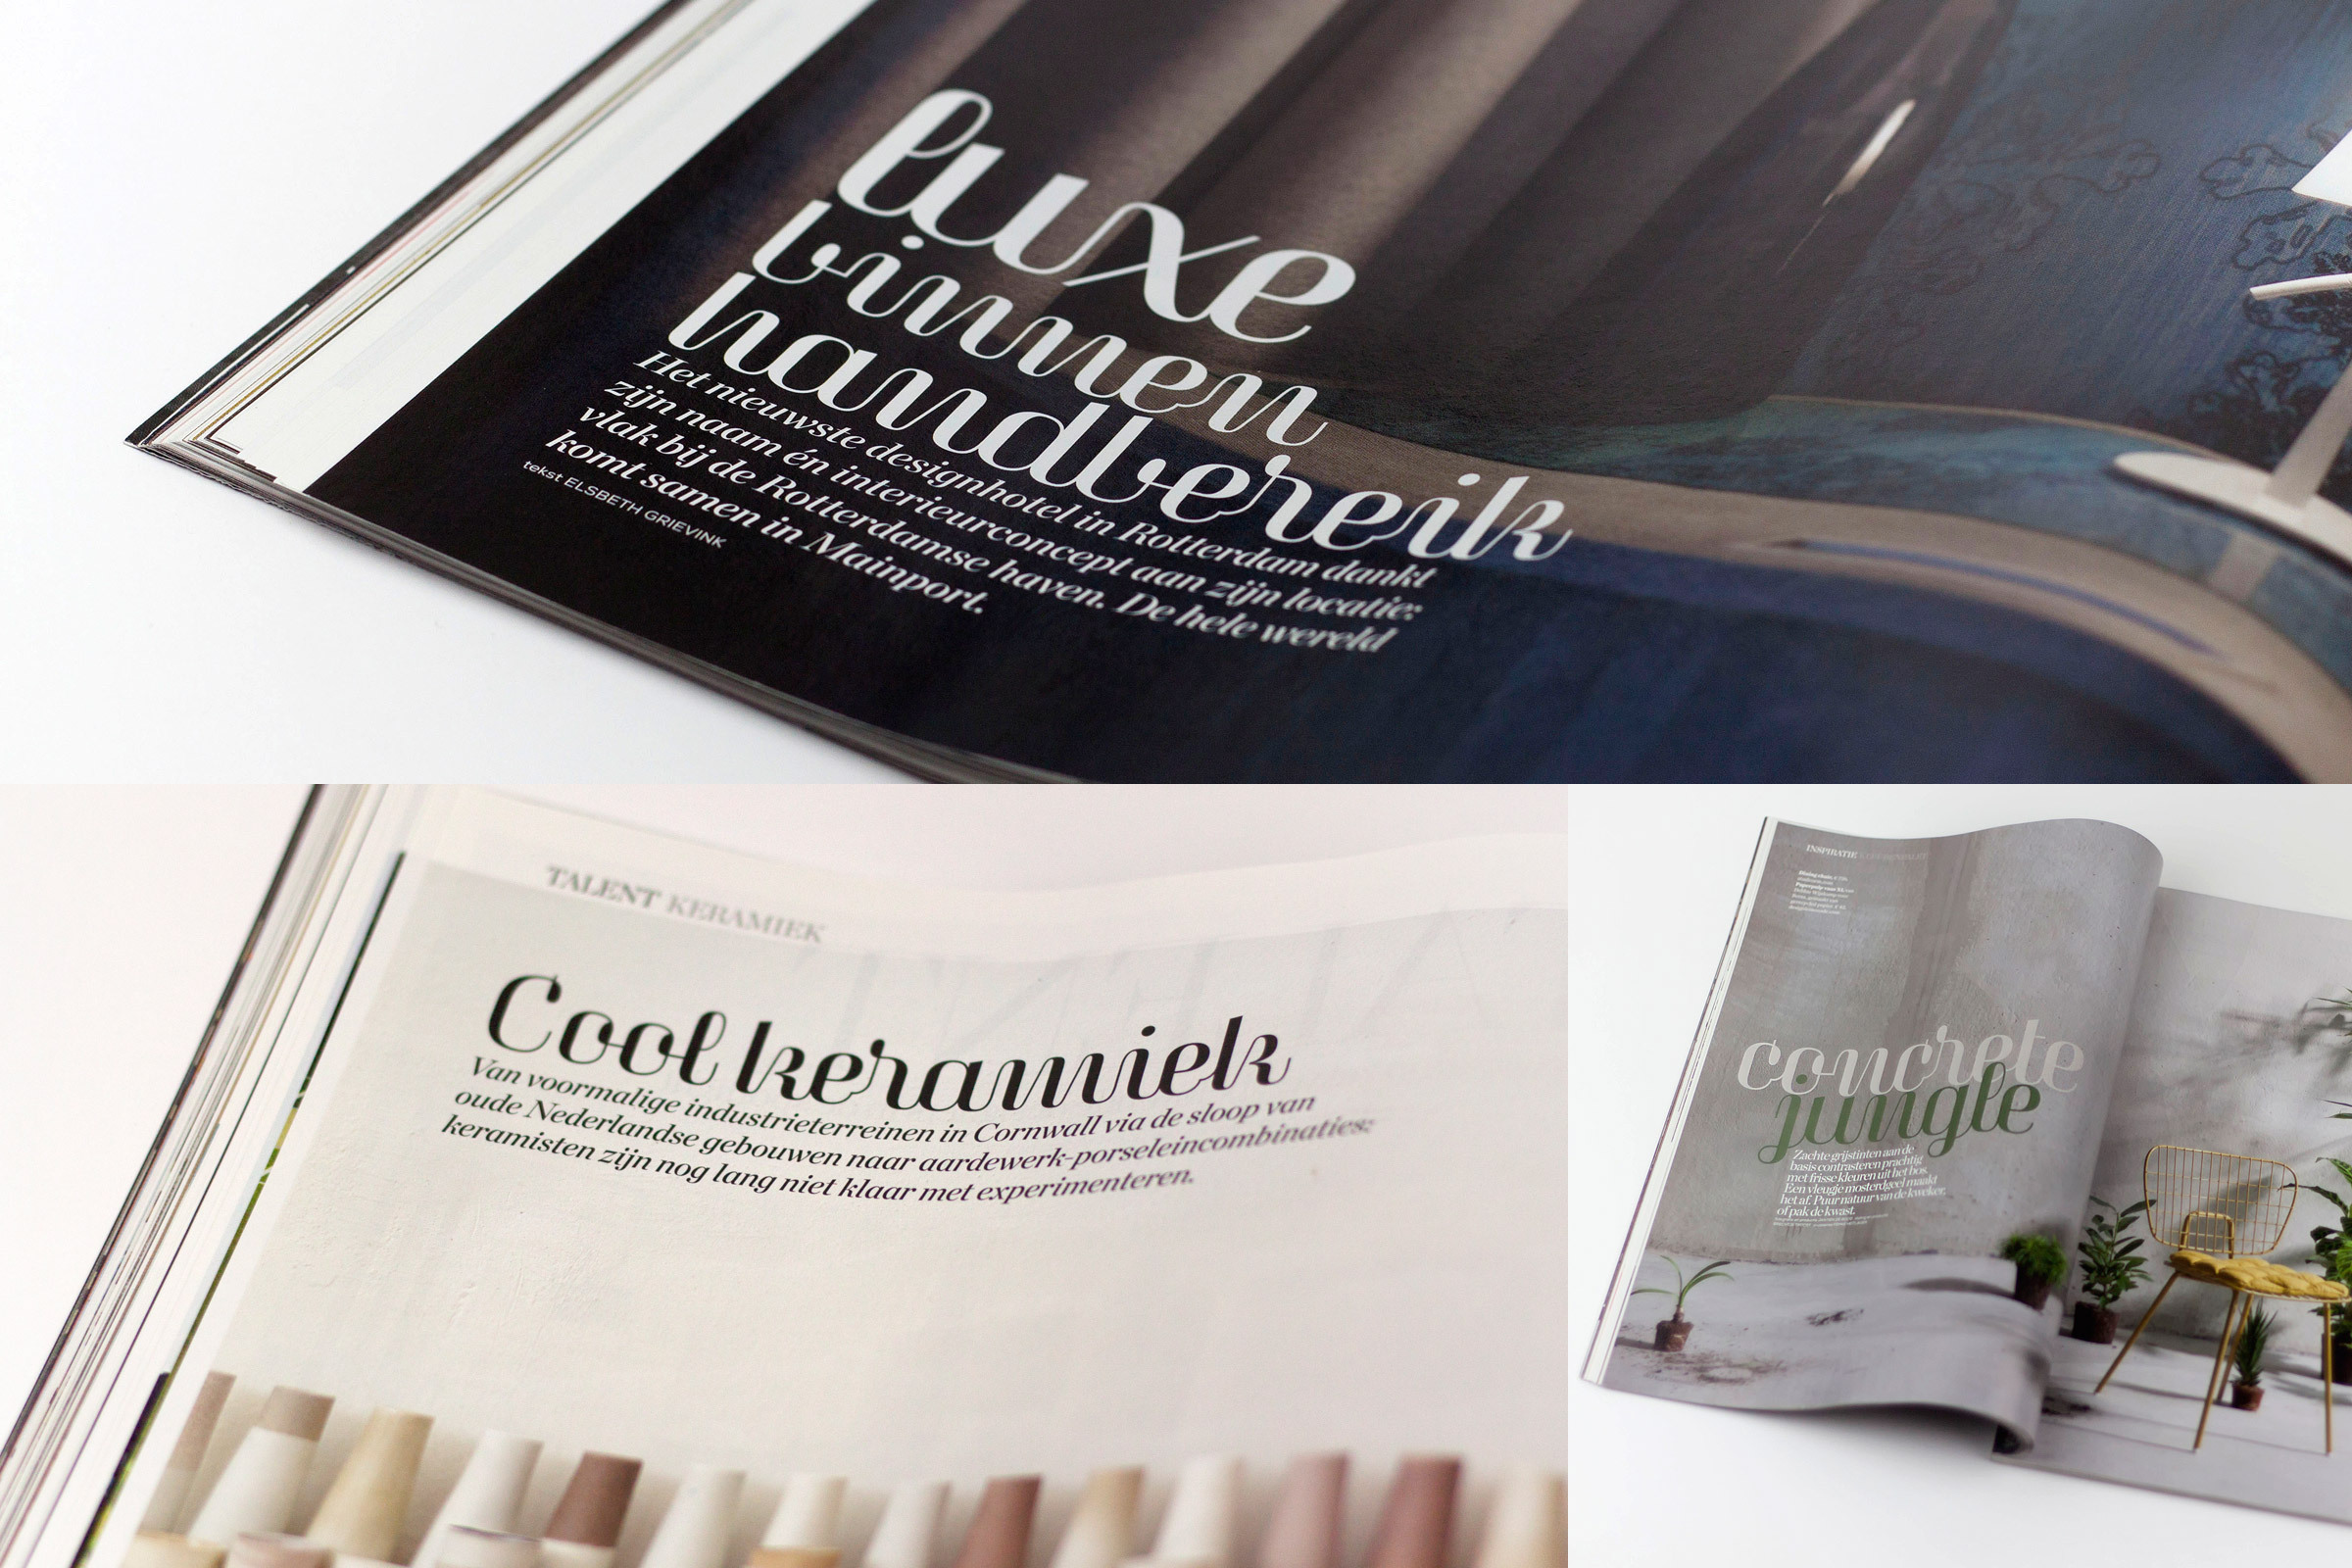 Magasin in use in the Dutch interiors decoration magazine “NL Elle Decoration”. This high-contrast display typeface is inspired by the pointed pen and copperplate calligraphy, yet with a retro-chic twist. It combines a sense of script with geometric and slightly condensed structure resulting in idiosyncratic curves softly connecting the vertical elegance of its forms. Magasin is ideally suited for use in large sizes in magazines headlines, posters or packaging.